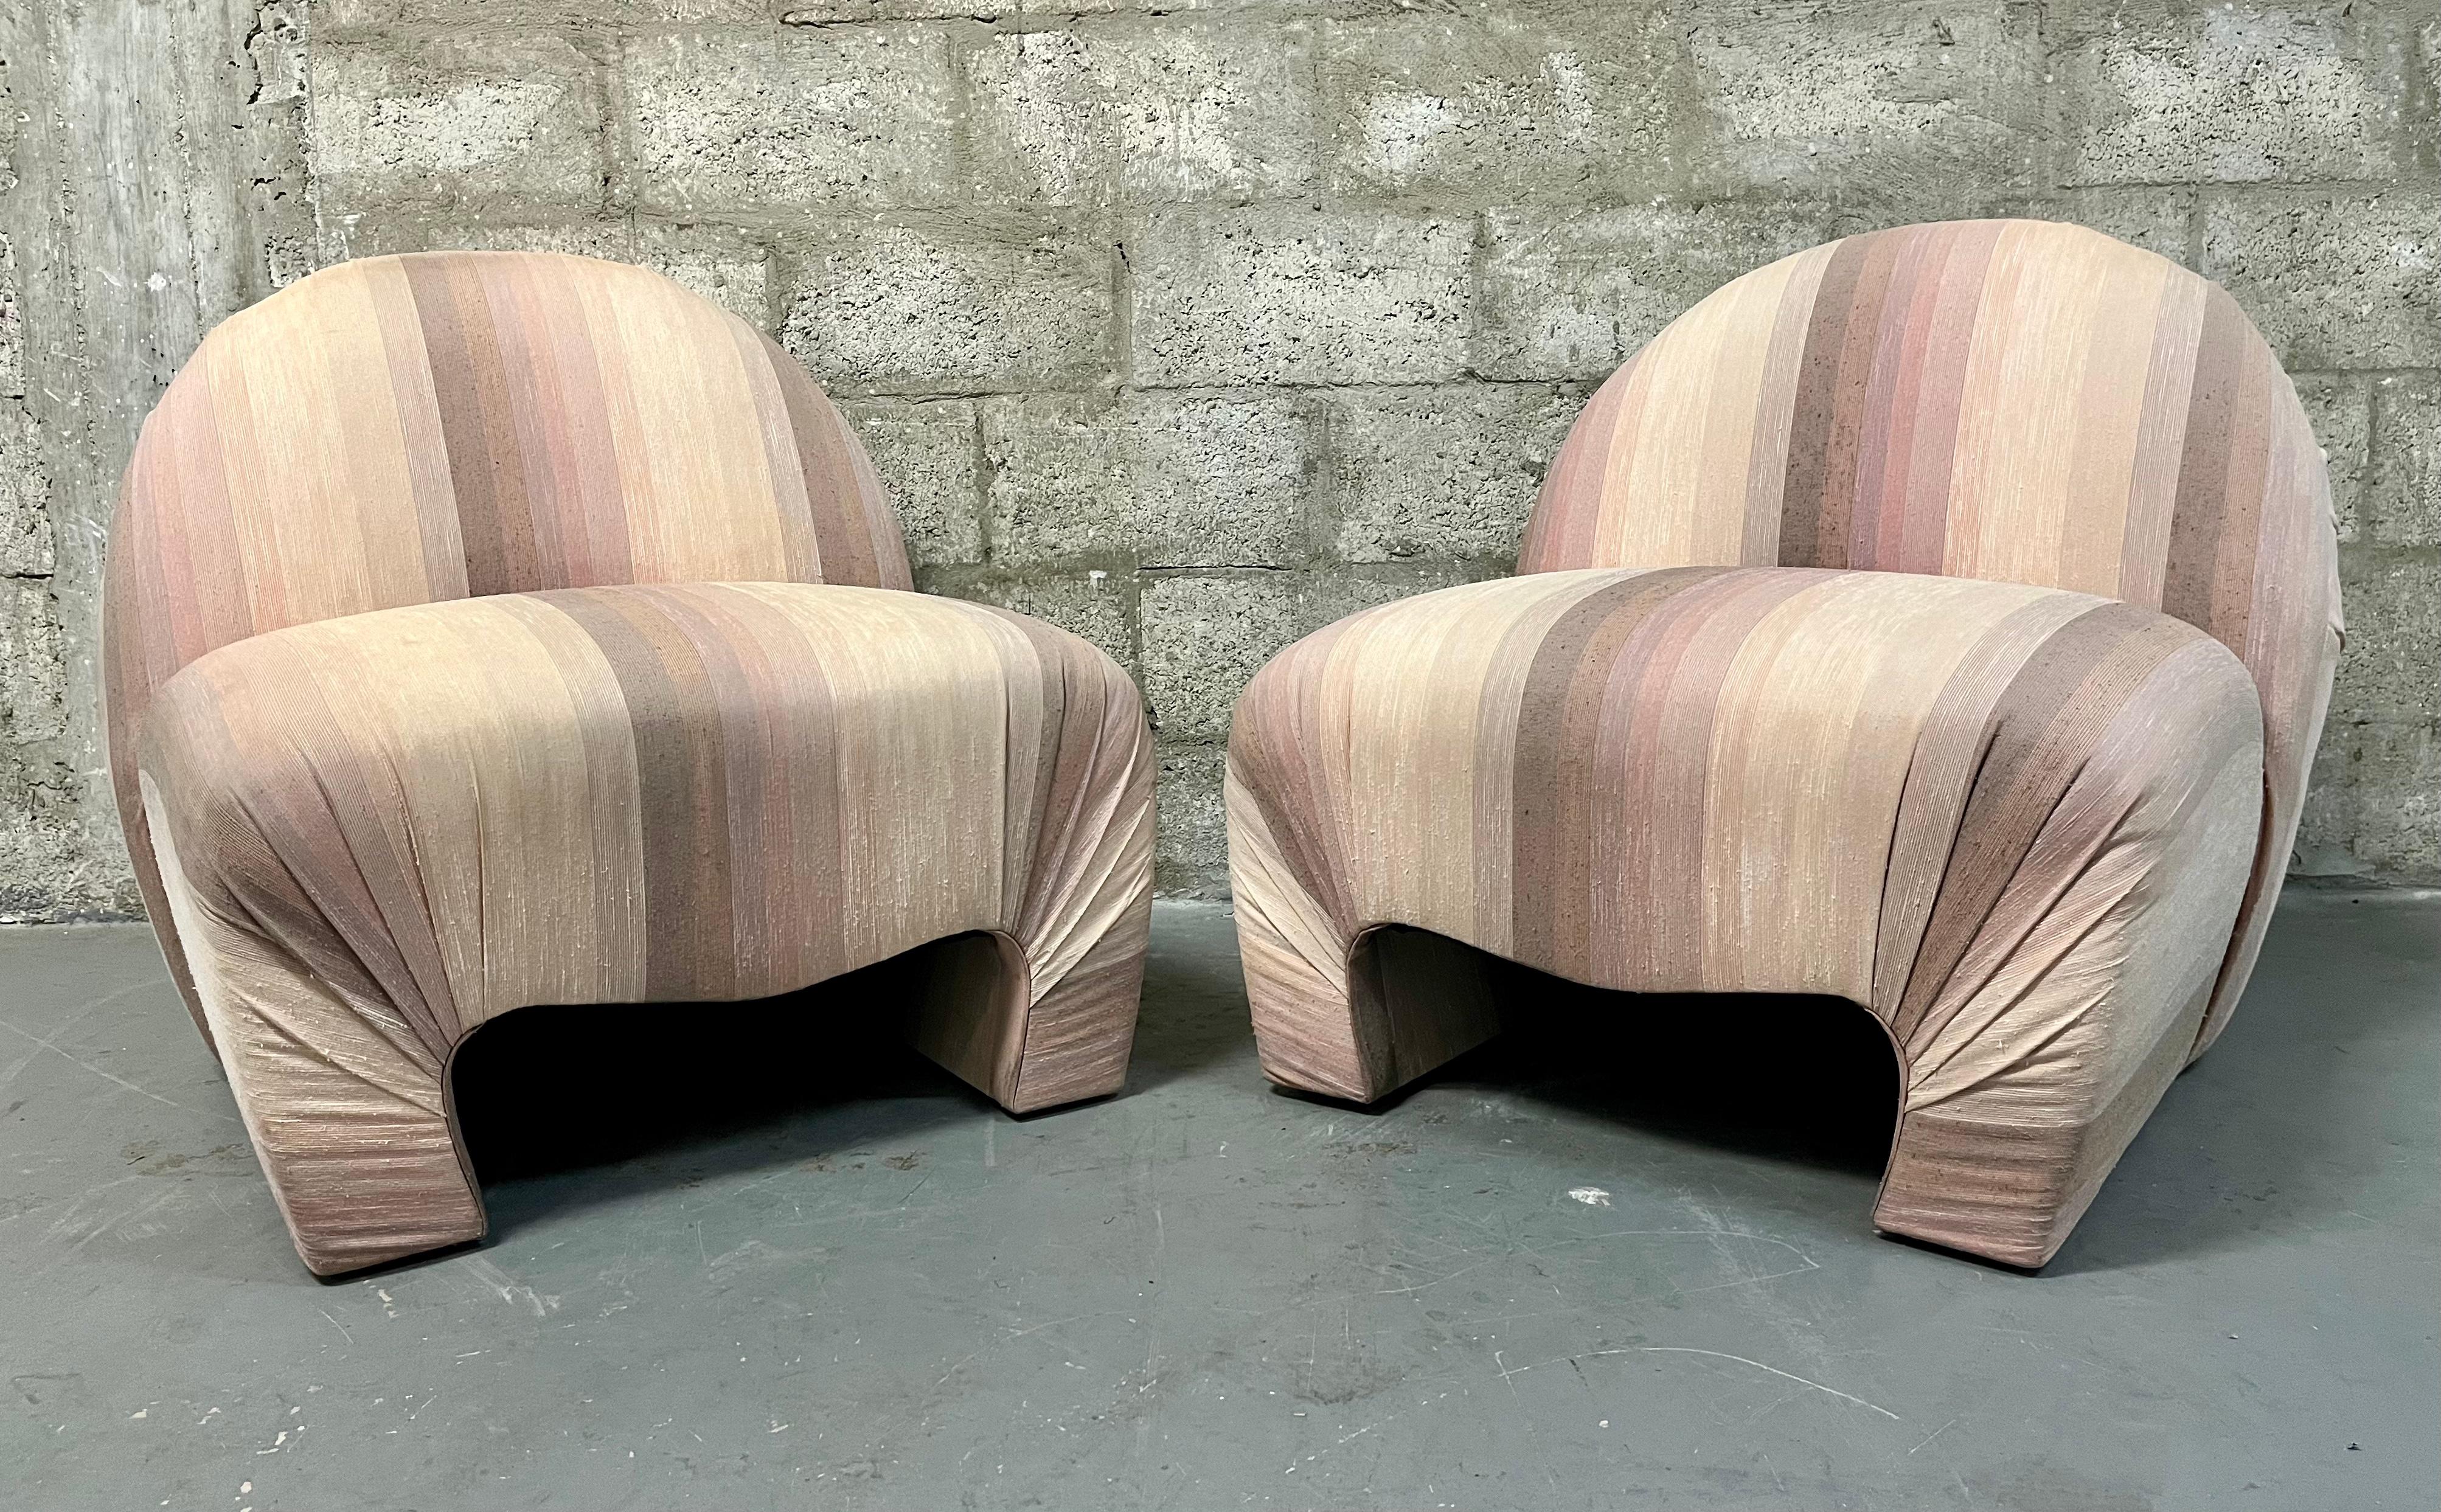 Post-Modern A Pair of Lounge Chairs in the Vladimir Kagan for Weiman Style. Circa 1980s For Sale